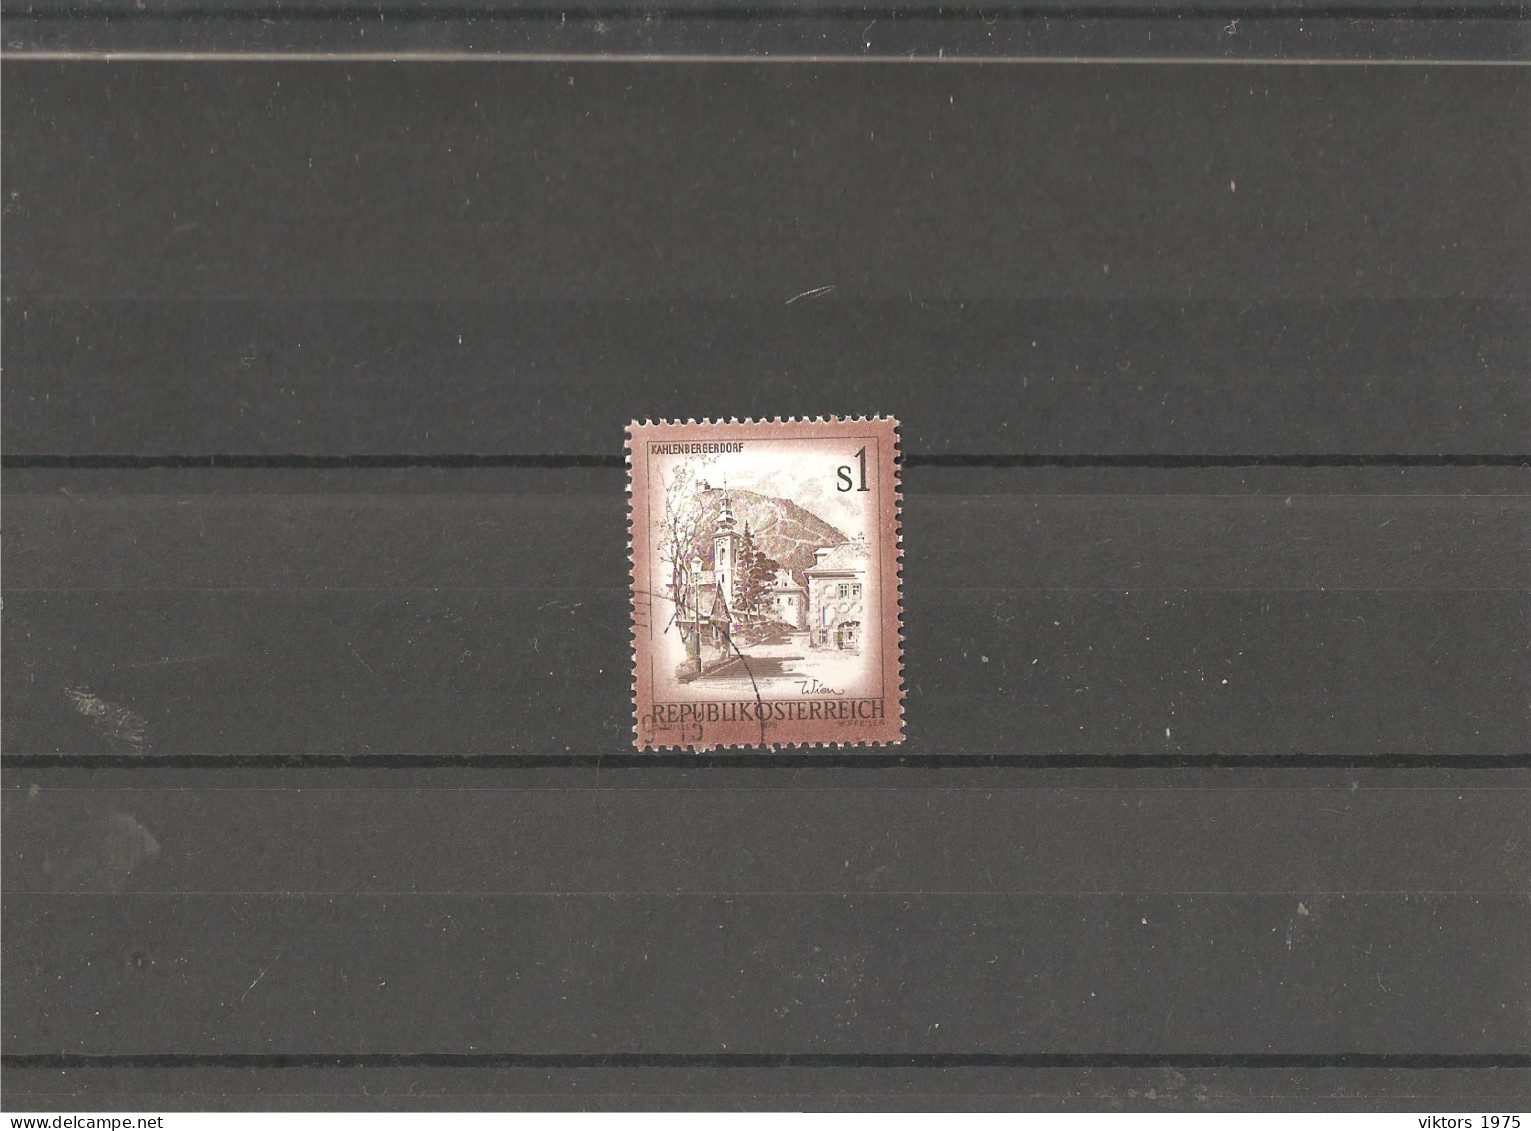 Used Stamp Nr.1476 In MICHEL Catalog - Used Stamps